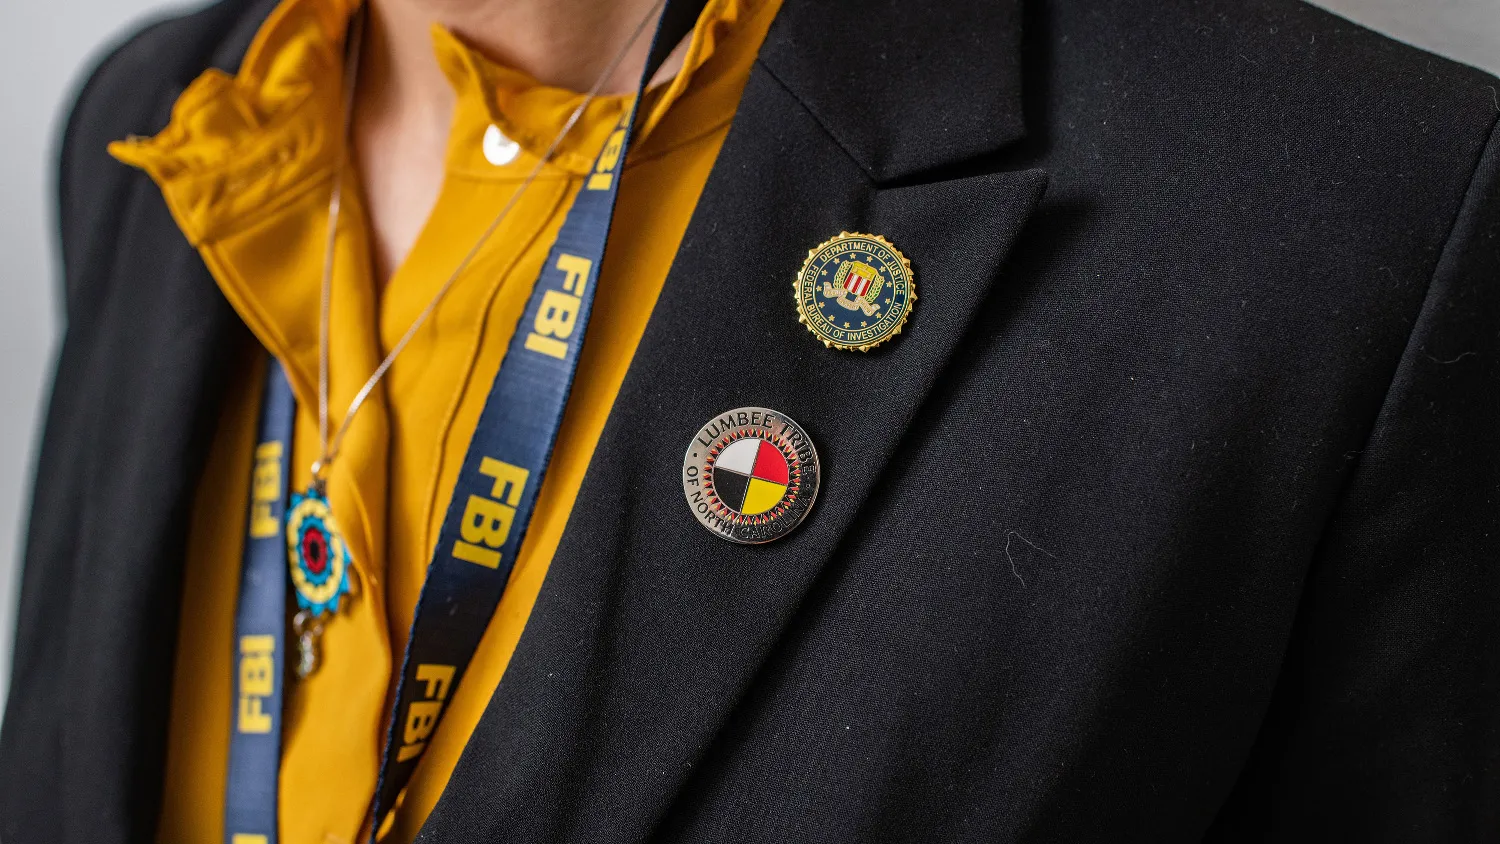 Two FBI pins attached to the flap of a women’s blazer